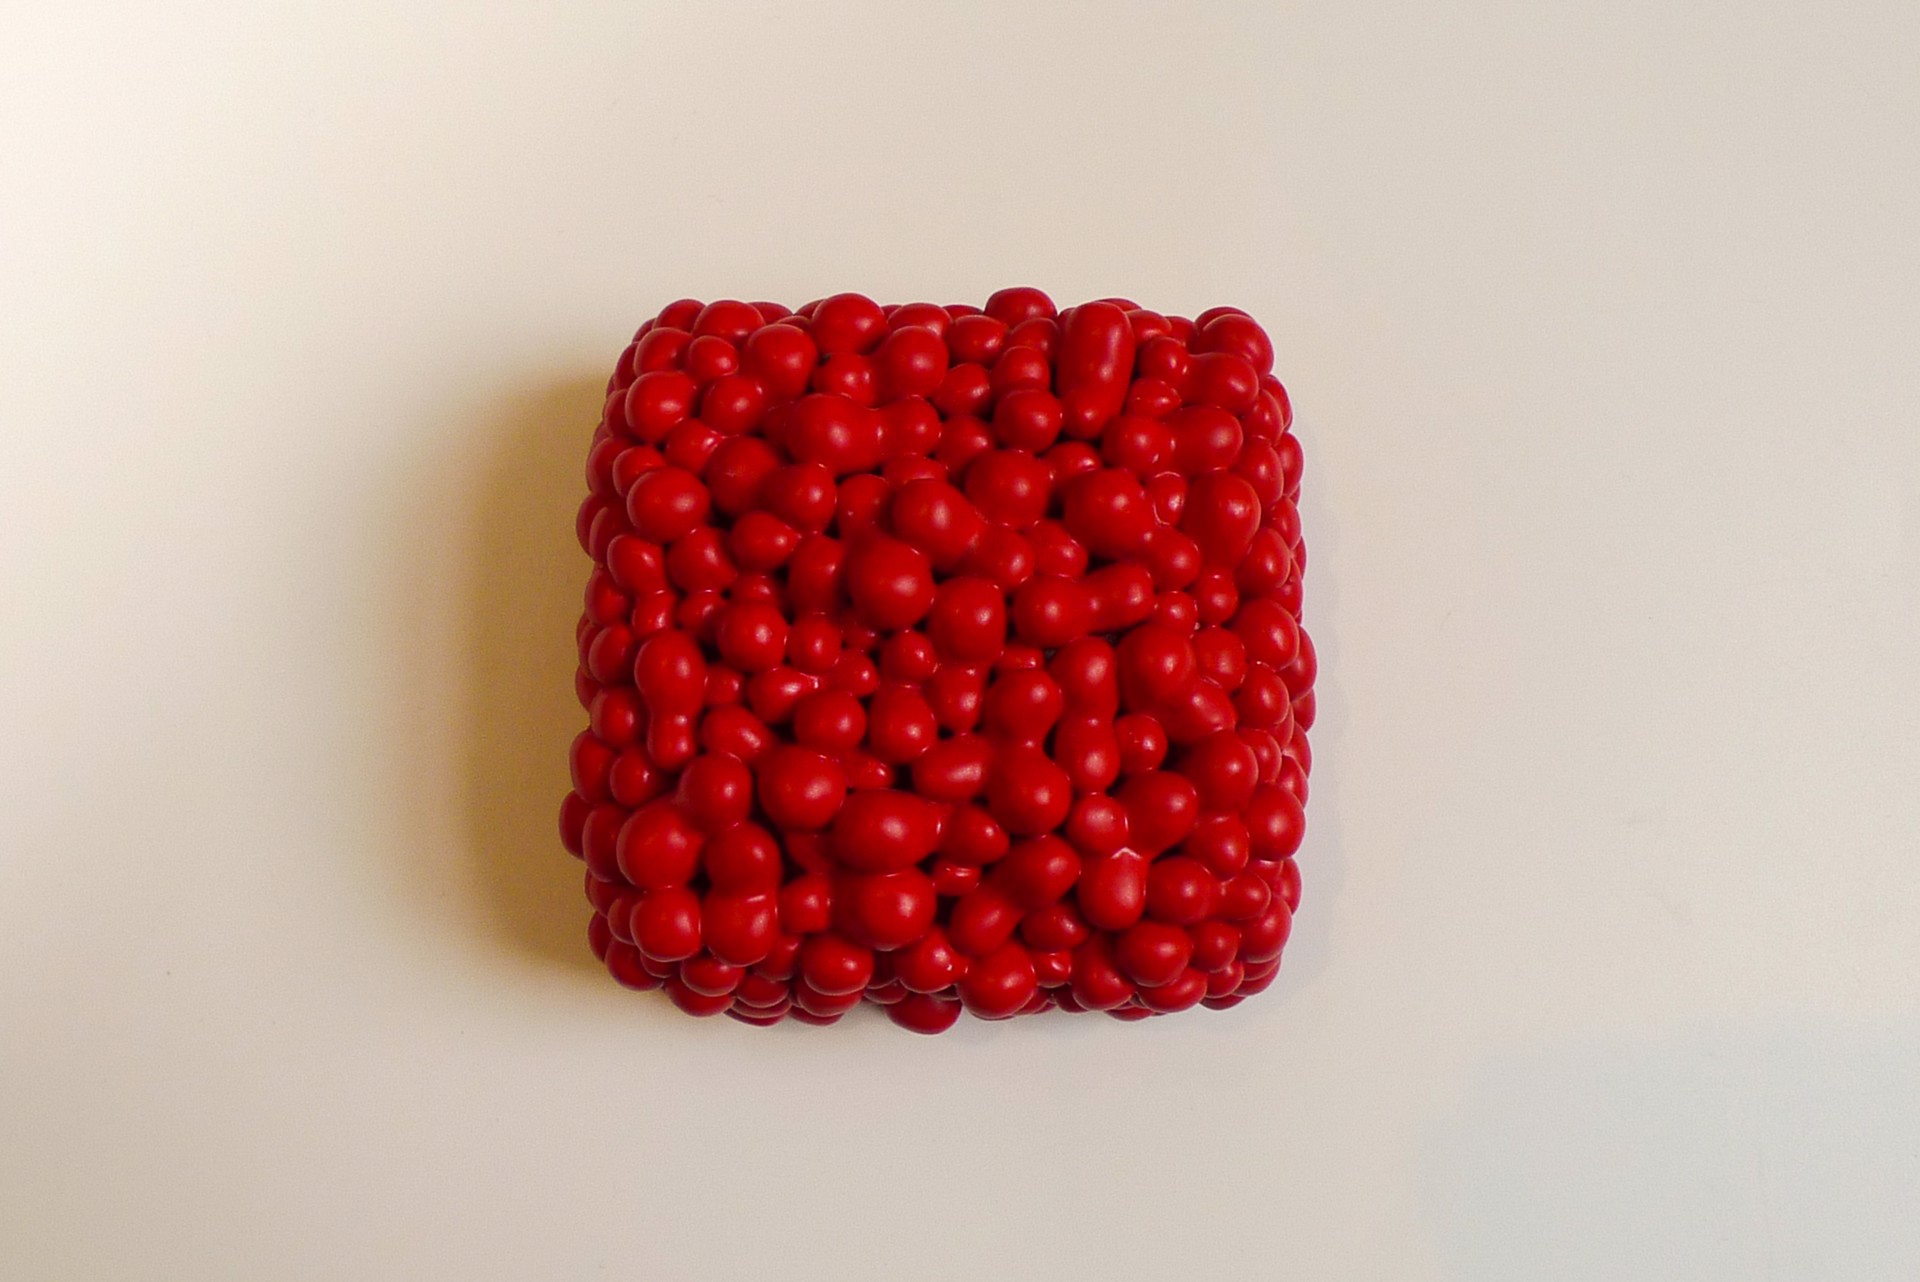 Red Bubble Wall Box by Rachelle Miller